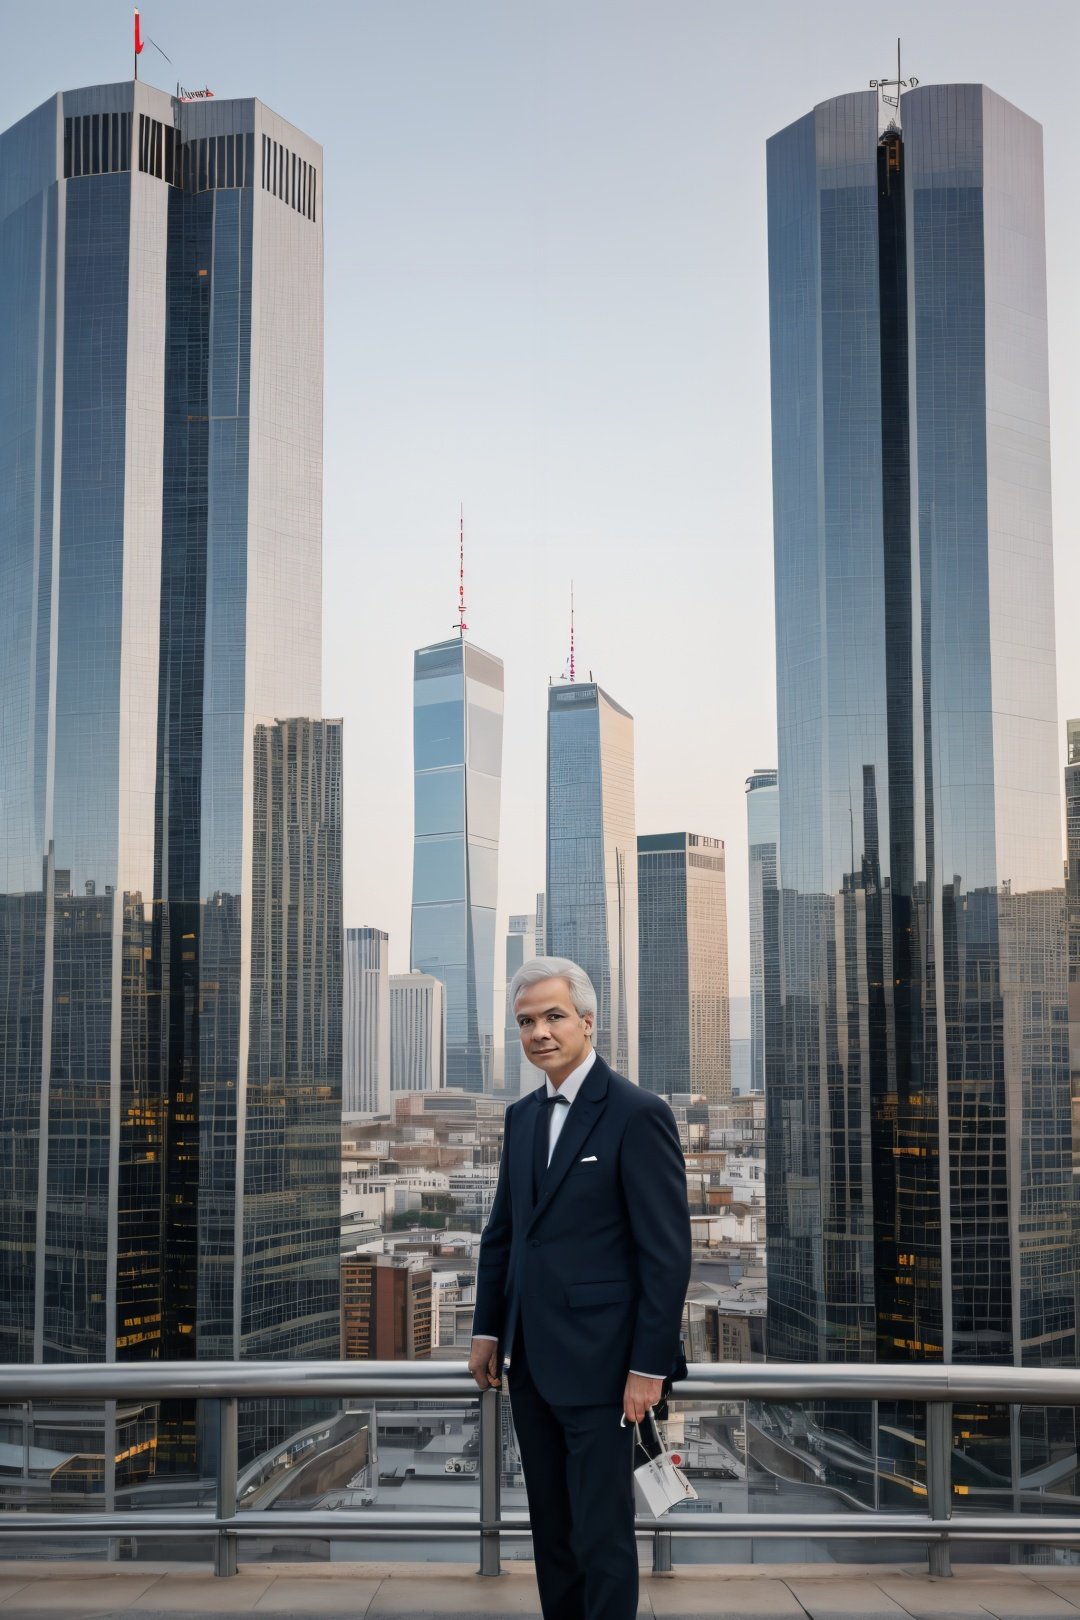 high-quality, realistic image of a stunningly handsome male dressed in an impeccably tailored Sherlock Holmes suit with a touch of elegant white hair, confidently standing in the midst of a futuristic cityscape. The man should exude charm and sophistication with a mature yet distinguished appearance. The futuristic city backdrop should be bustling with cyberpunk elements, accentuating the blend of classic and contemporary aesthetics. The image should showcase impeccable attention to detail, capturing the essence of a professional photoshoot. The lighting should be cinematic, casting captivating shadows that enhance the overall appeal of the composition. The futuristic elements in the city should be seamlessly integrated into the setting, creating a visually stunning and harmonious scene. Please ensure the image portrays a sense of urban elegance, sophistication, and timeless style,   <lora:g4njar_v1-000005:0.8>